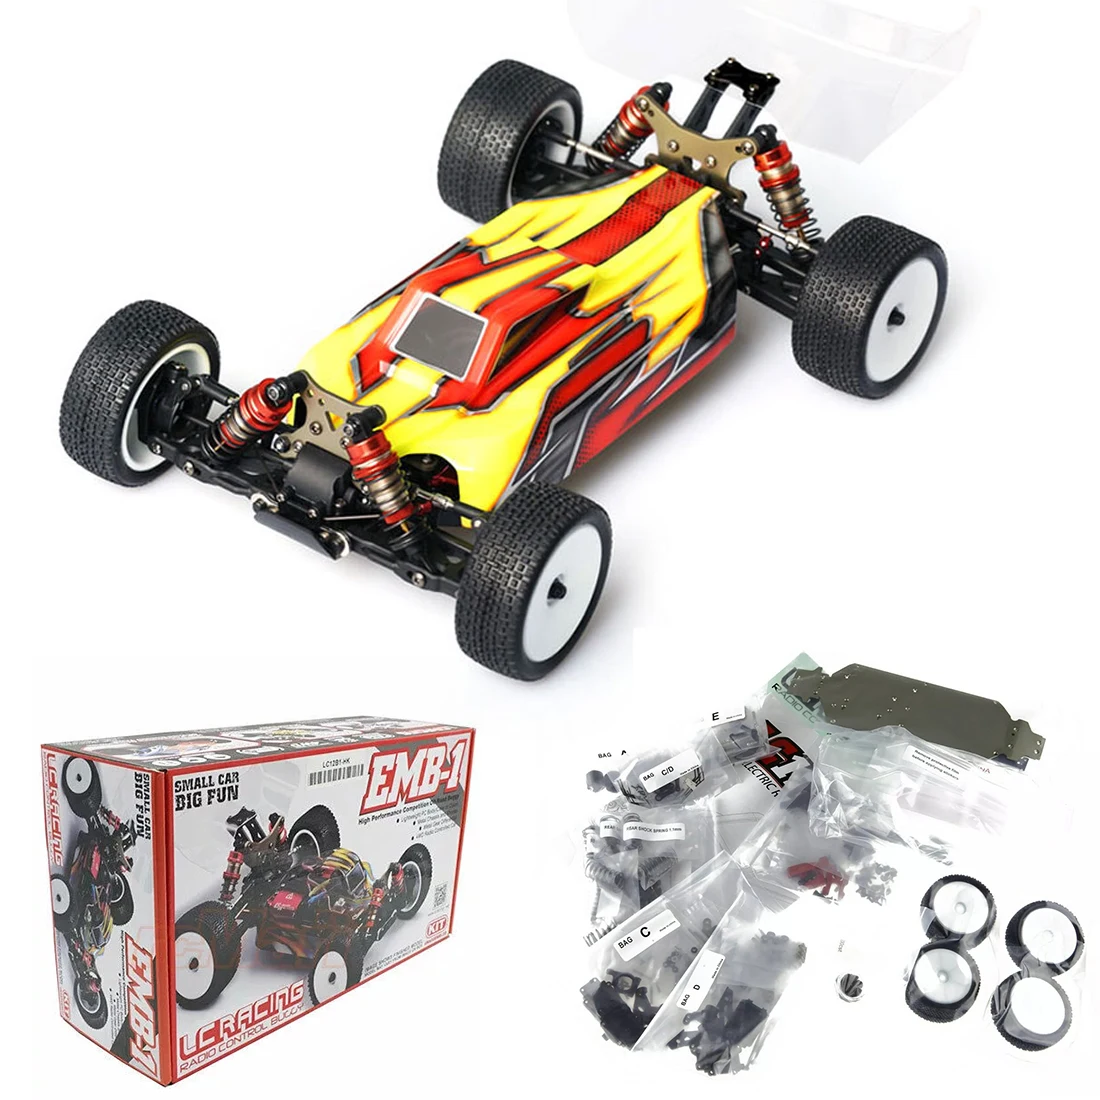 

LC Racing LC12B1 1:12 4WD High Speed Brushless Buggy Off-road Vehicle Kit